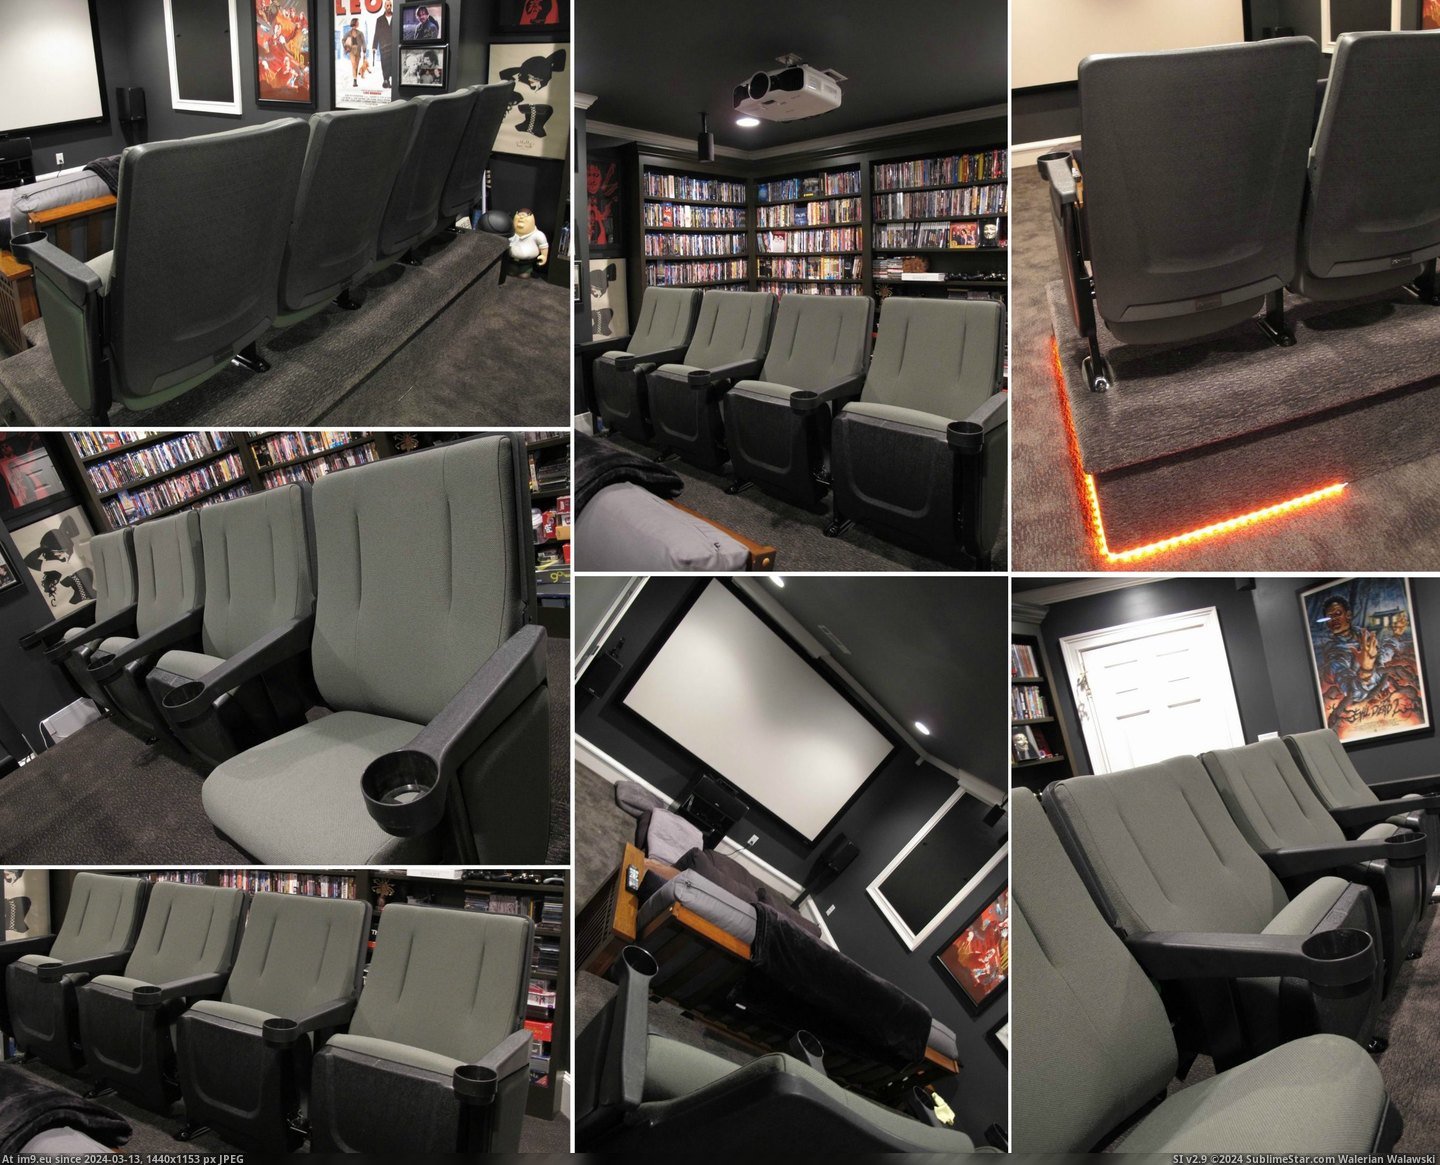 #Gaming #You #Room #Movie #Theater #Added #Seats #Wanted #Lot #See [Gaming] A lot of you wanted to see my movie-gaming room after the theater seats were added. Well...here ya go. :-) Pic. (Image of album My r/GAMING favs))